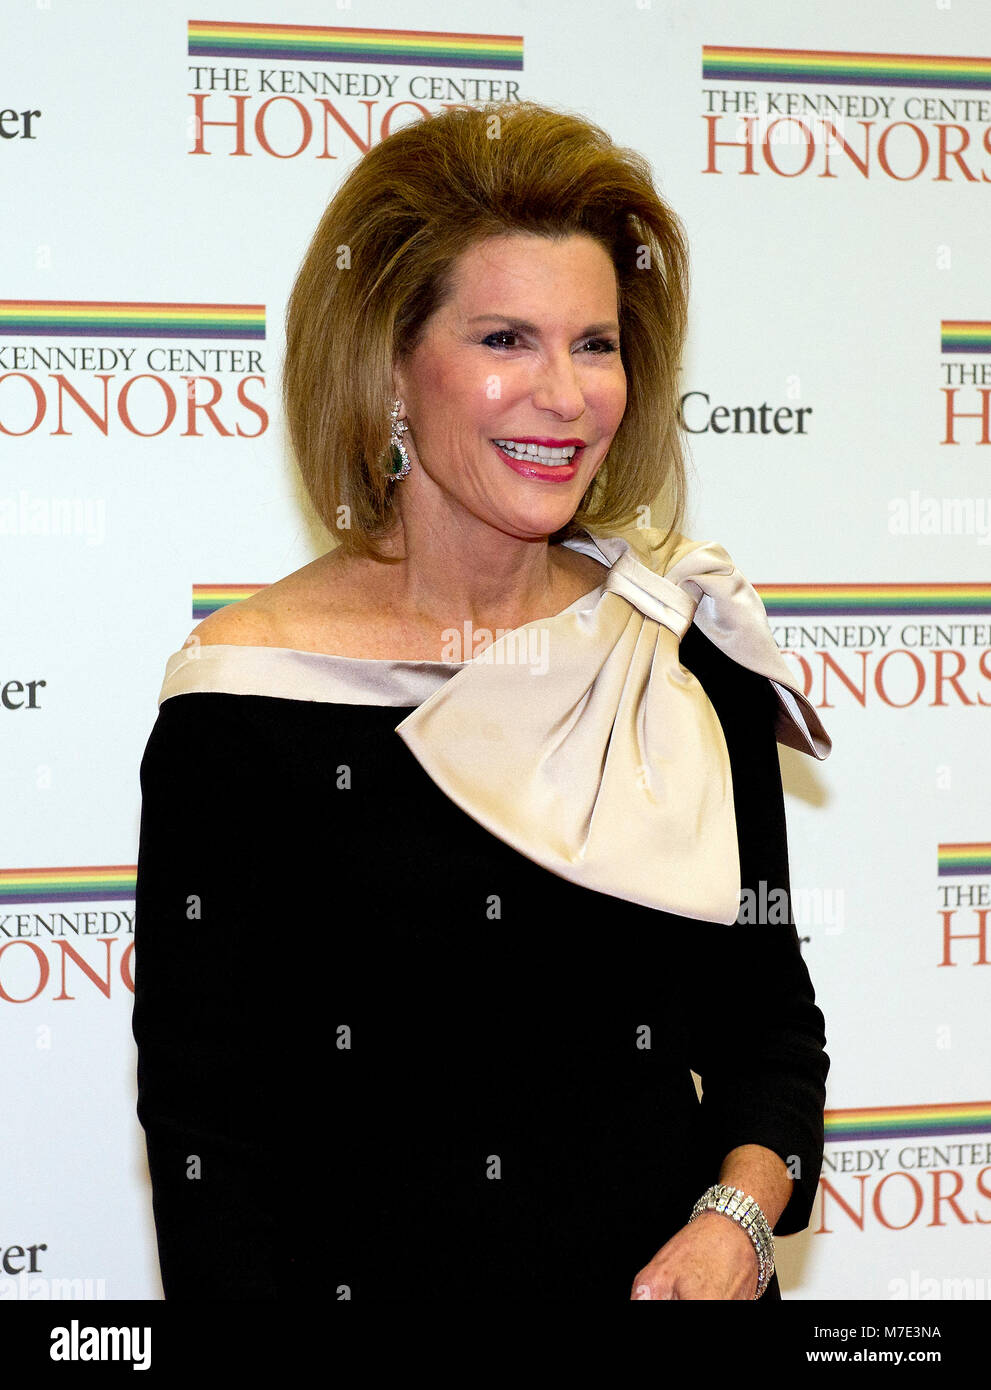 Ambassador Nancy Goodman Brinker, founder and CEO of Susan G. Komen for the Cure Foundation, arrives for the formal Artist's Dinner honoring the recipients of the 2012 Kennedy Center Honors hosted by United States Secretary of State Hillary Rodham Clinton at the U.S. Department of State in Washington, D.C. on Saturday, December 1, 2012. The 2012 honorees are Buddy Guy, actor Dustin Hoffman, late-night host David Letterman, dancer Natalia Makarova, and the British rock band Led Zeppelin (Robert Plant, Jimmy Page, and John Paul Jones). Credit: Ron Sachs / CNP /MediaPunch Stock Photo